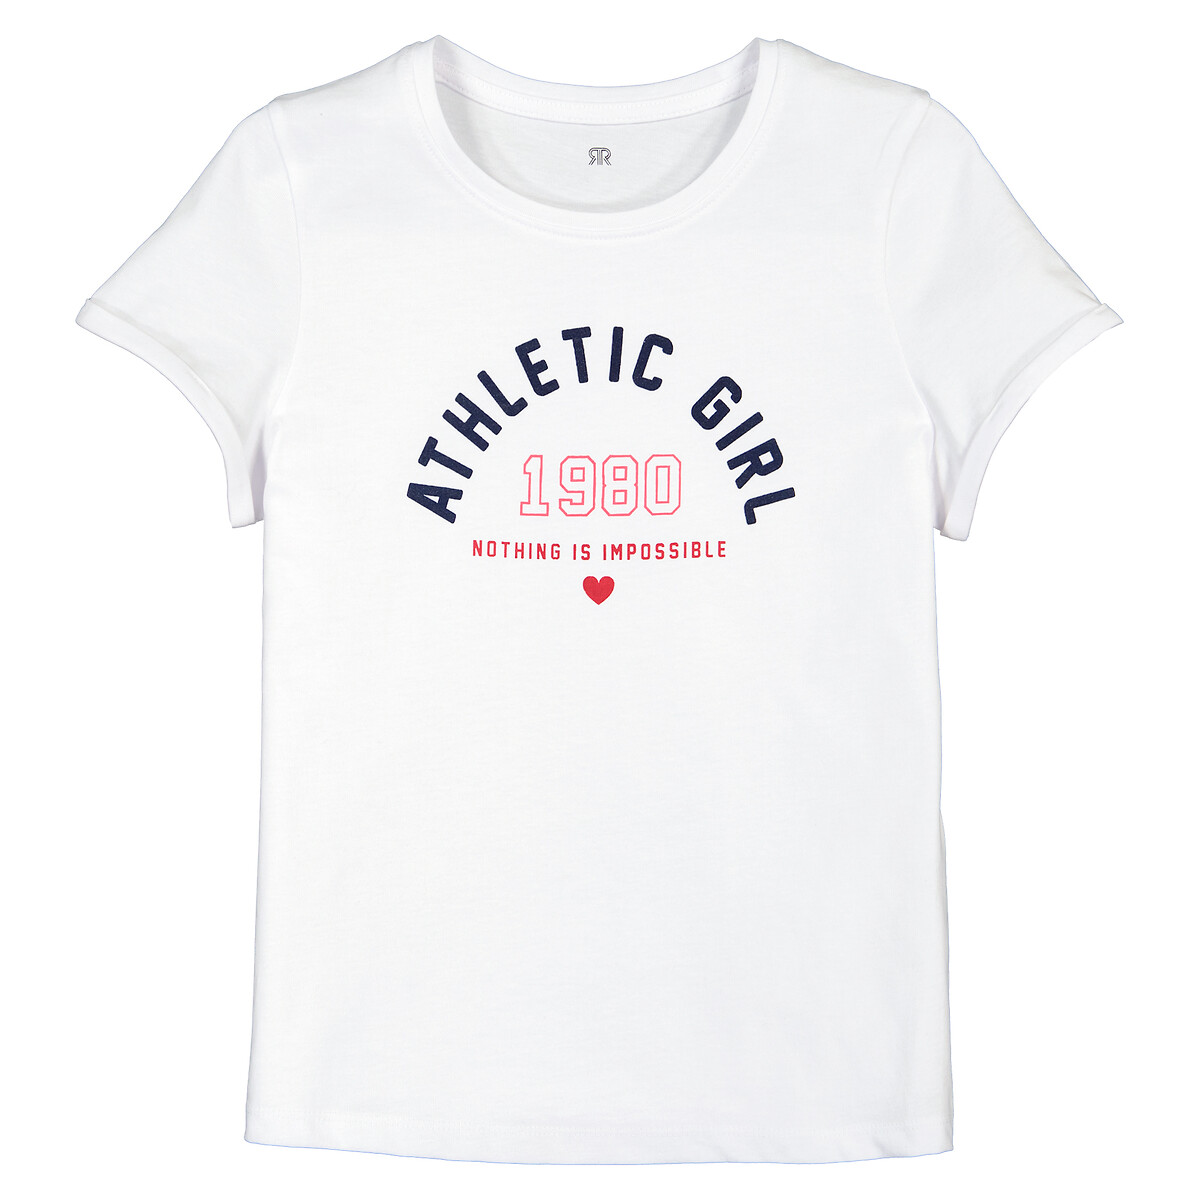 Cotton Athletic Girl T-Shirt with Crew Neck